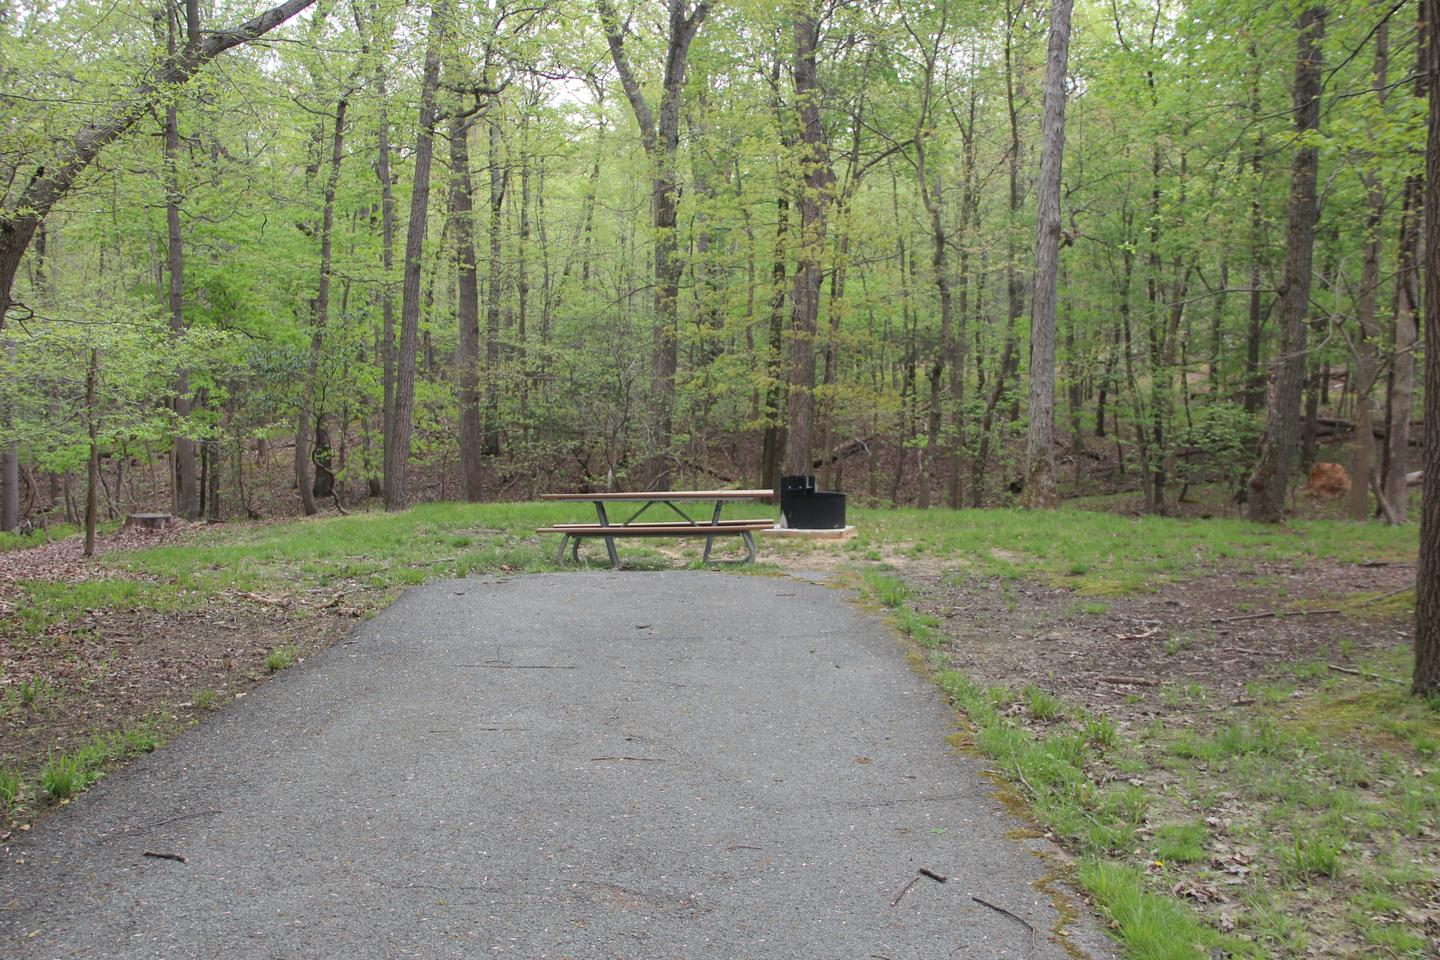 C97 C Loop of the Greenbelt Park Maryland campground